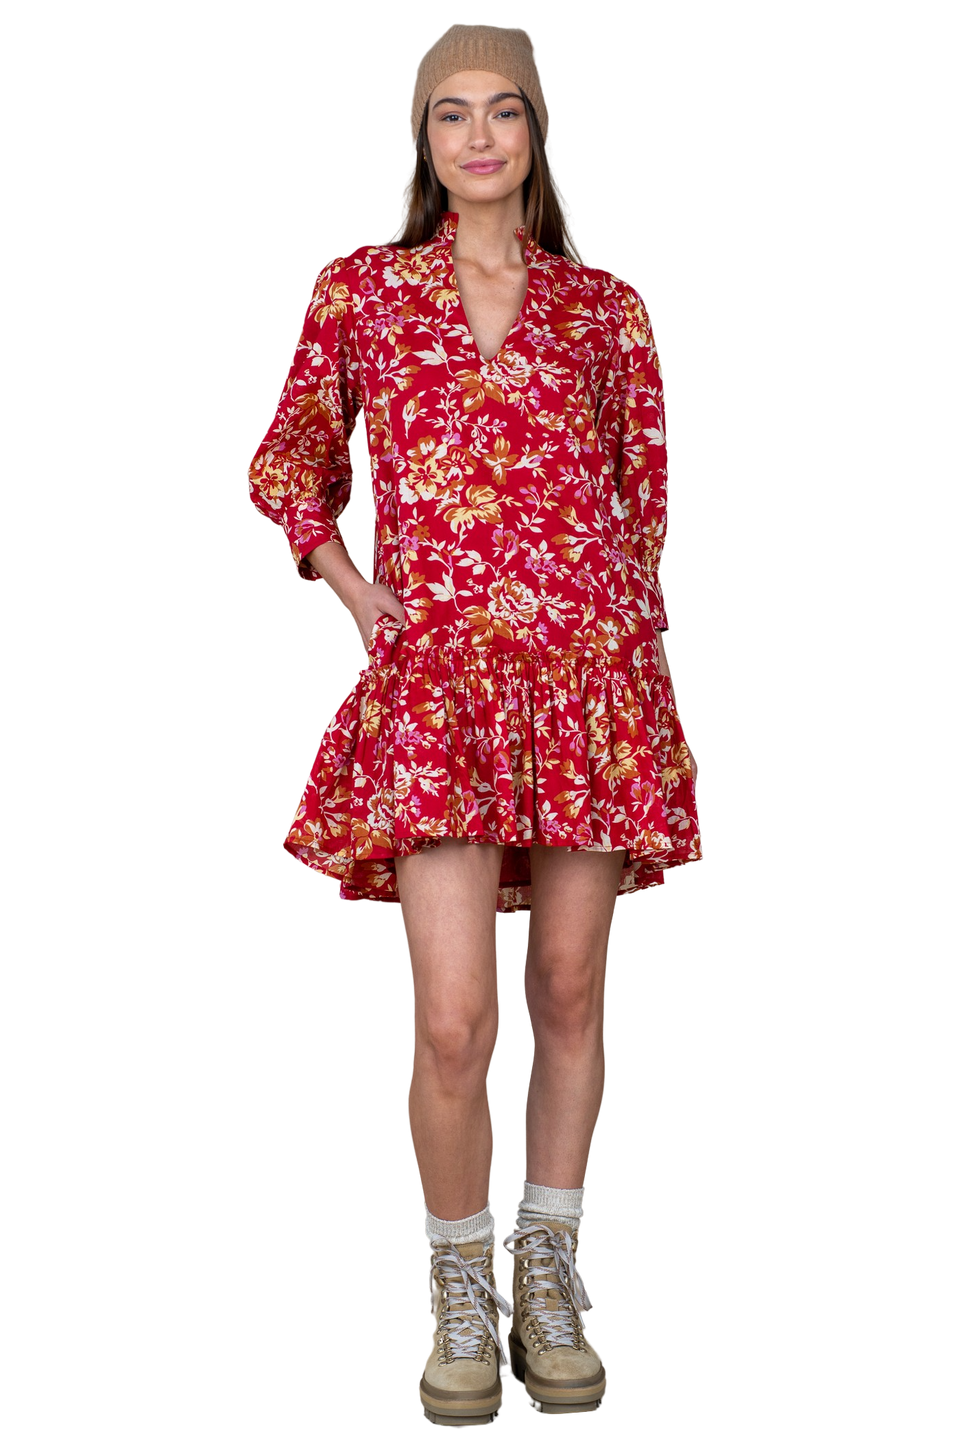 Olivia James Chloe Dress in Lodge Floral Cotton Voile